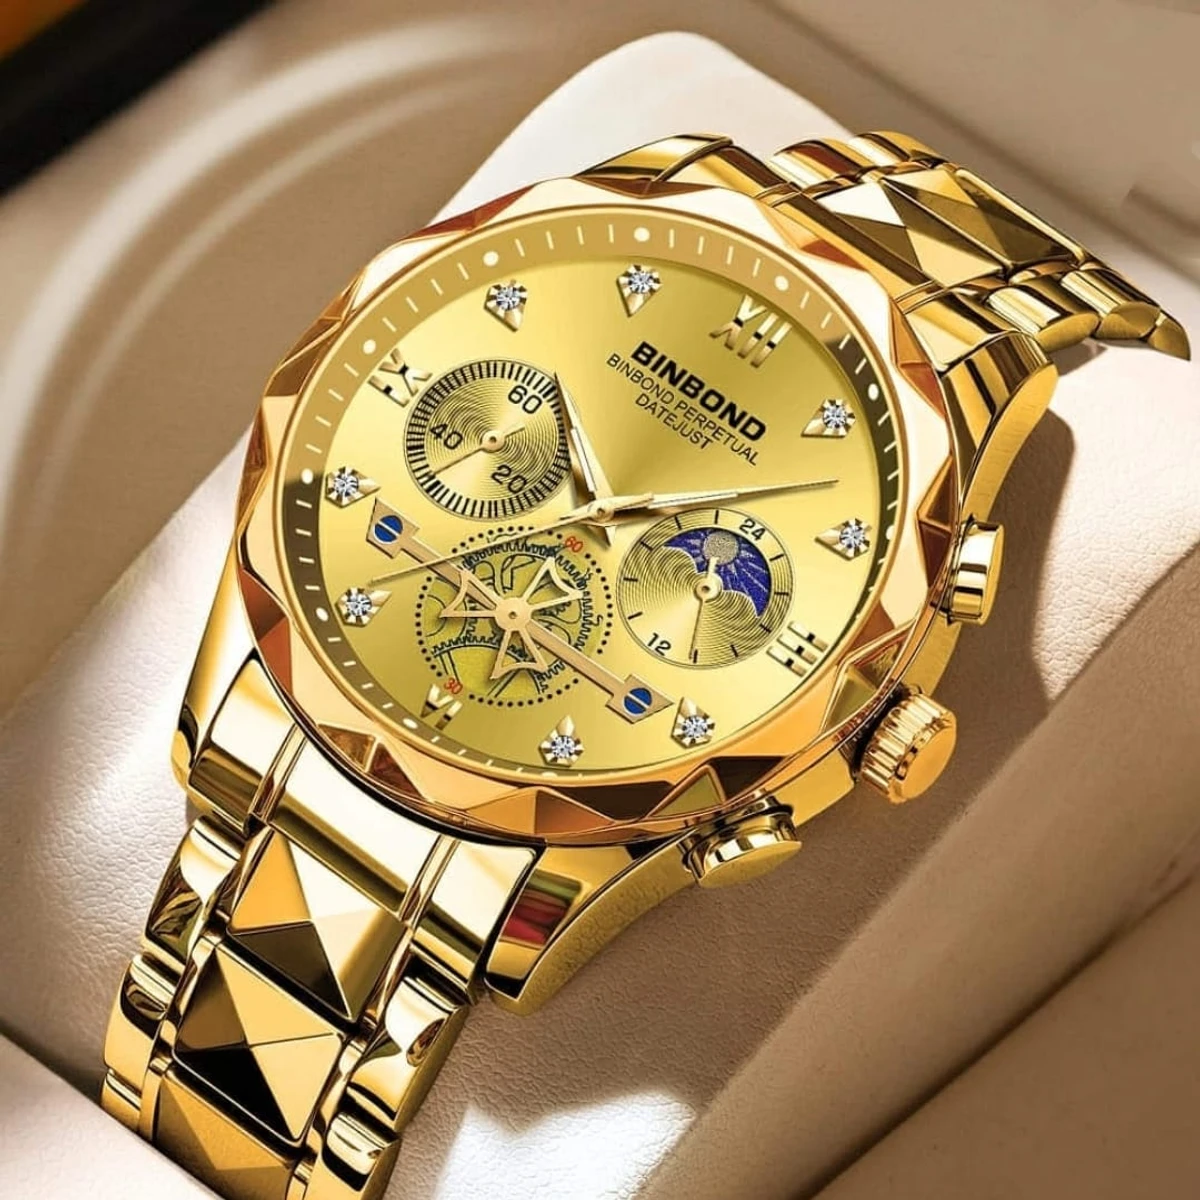 New Luxury Diamond Watch For Men Stainless Steel Waterproof Chronograph Wristwatches Full gold